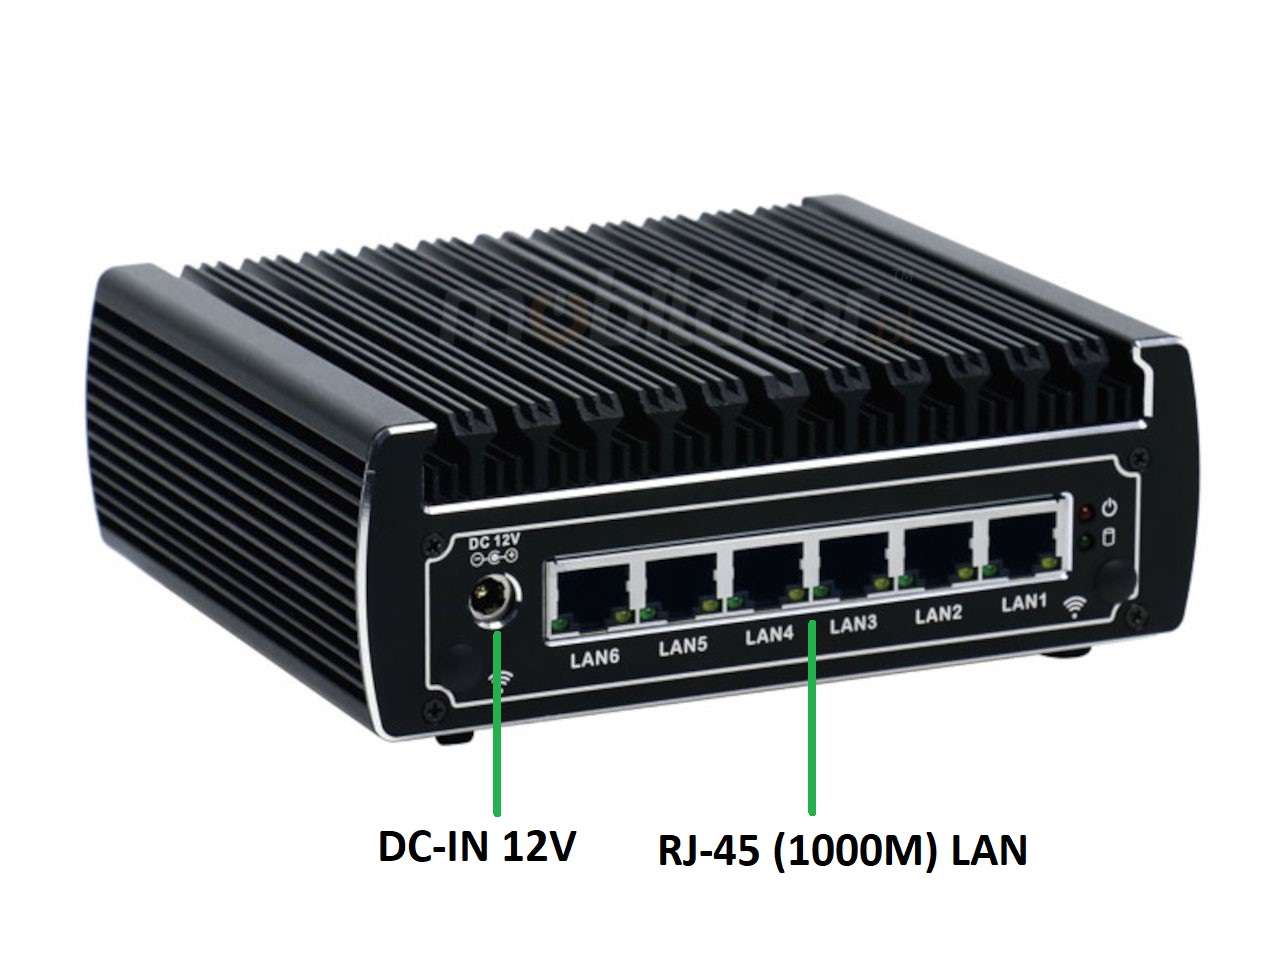  IBOX N133 v.3, back IO, industrial small fast reliable intel fanless industrial small LAN INTEL i3 SSD DDR4